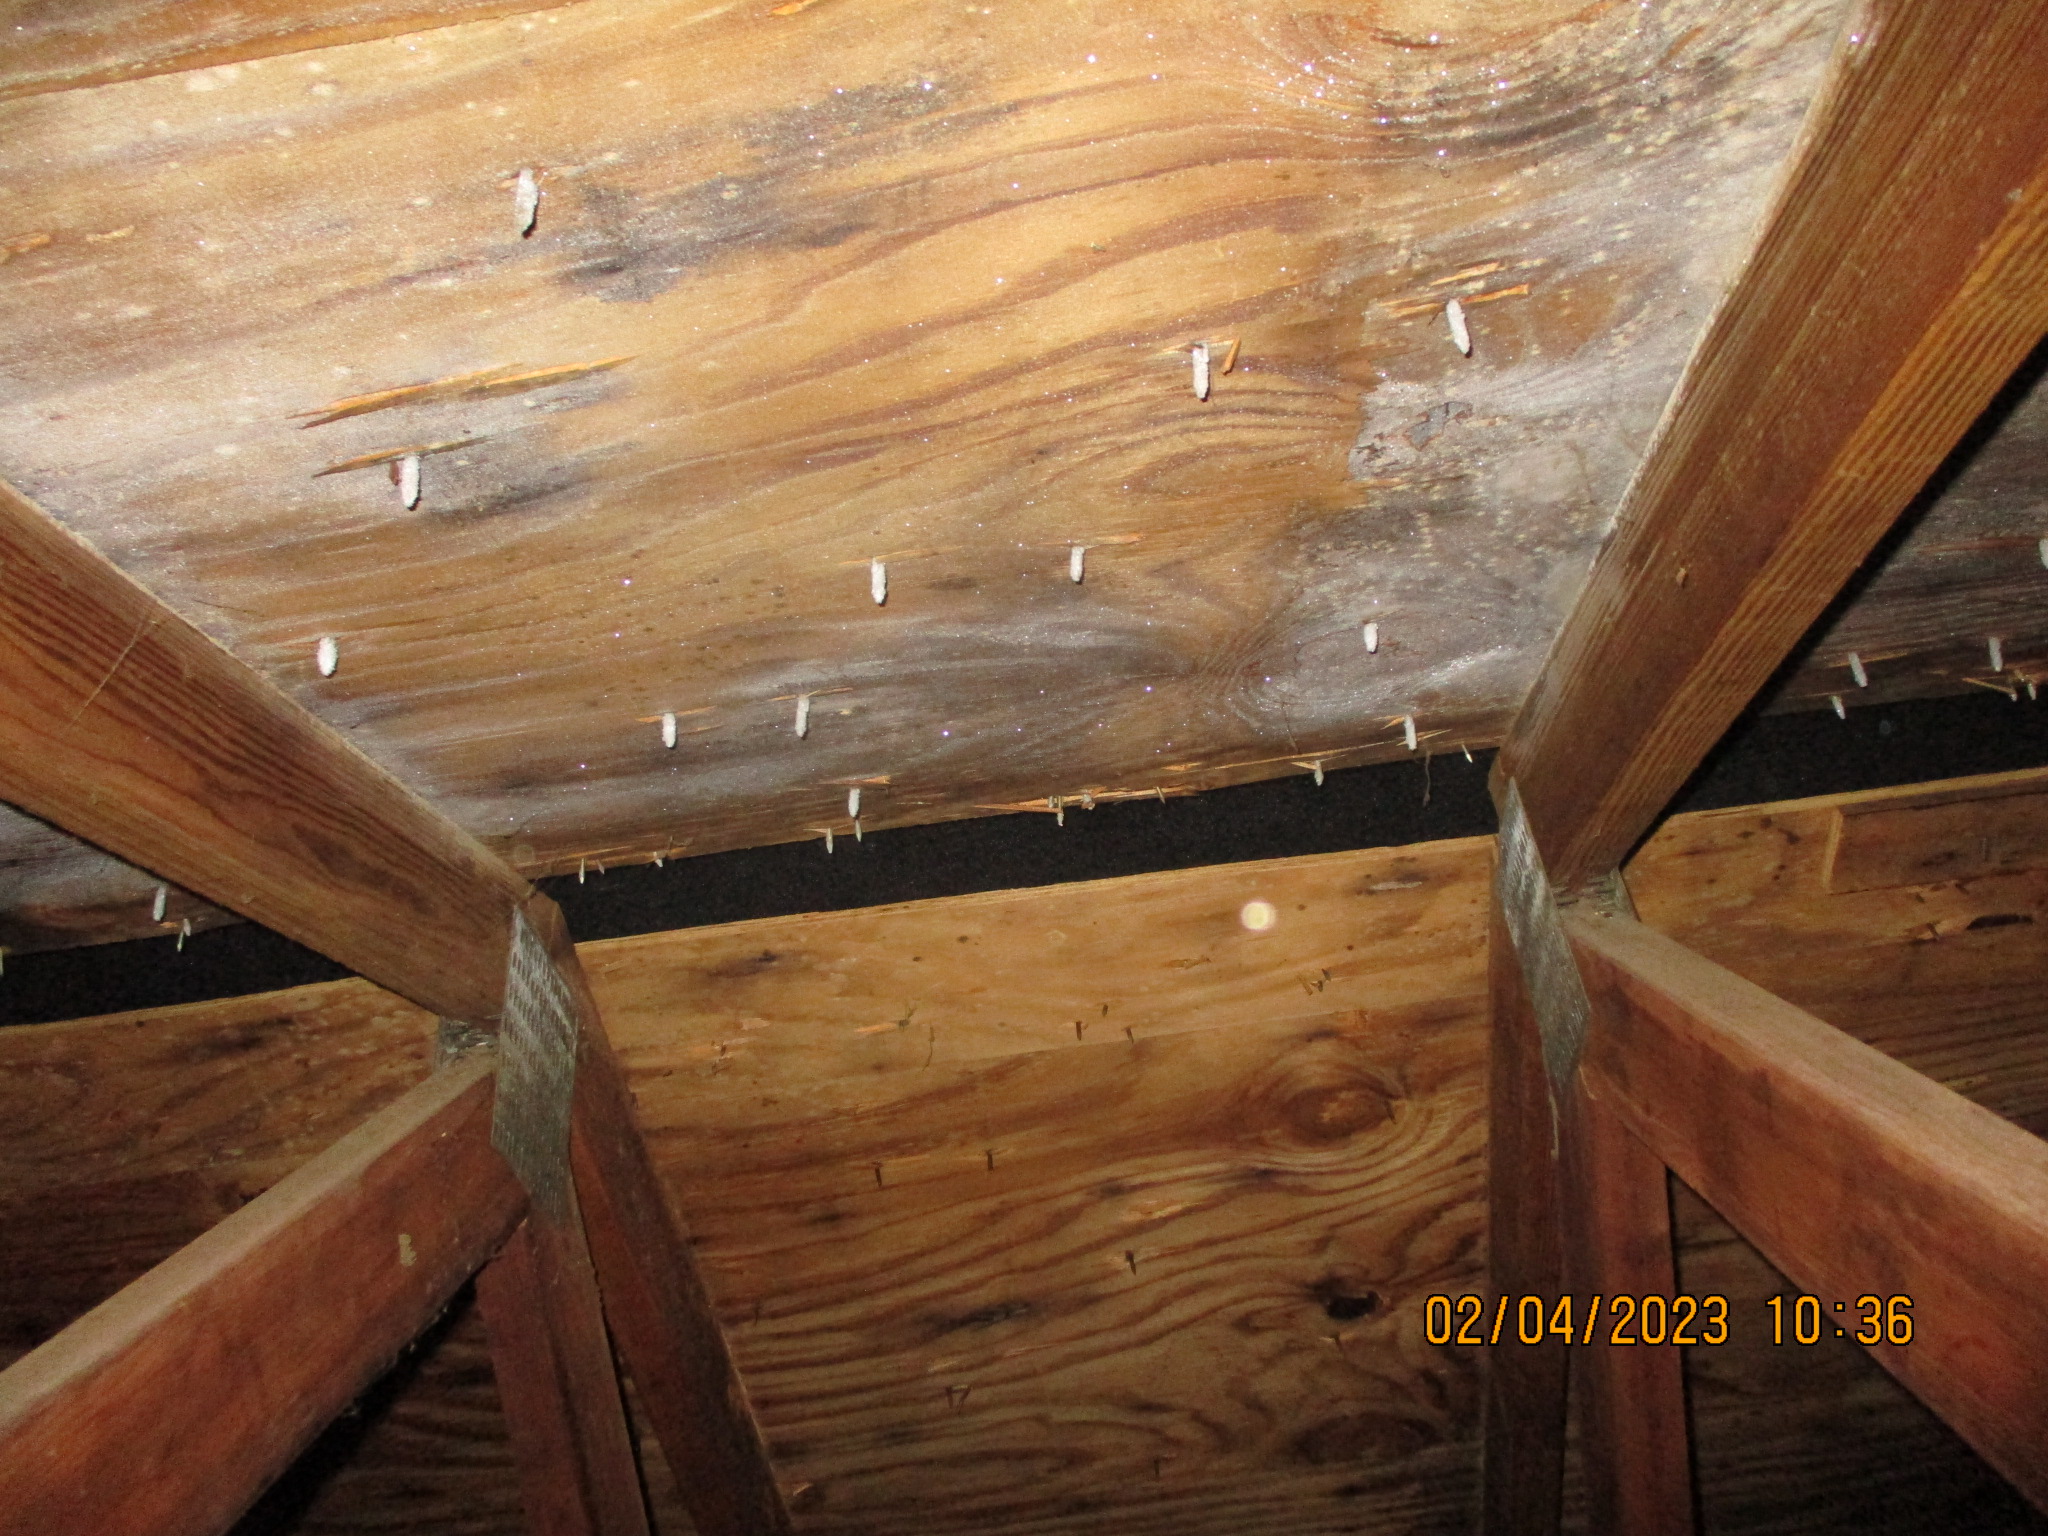 Frost on sheathing and not sure if the ridge vent allows air flow.